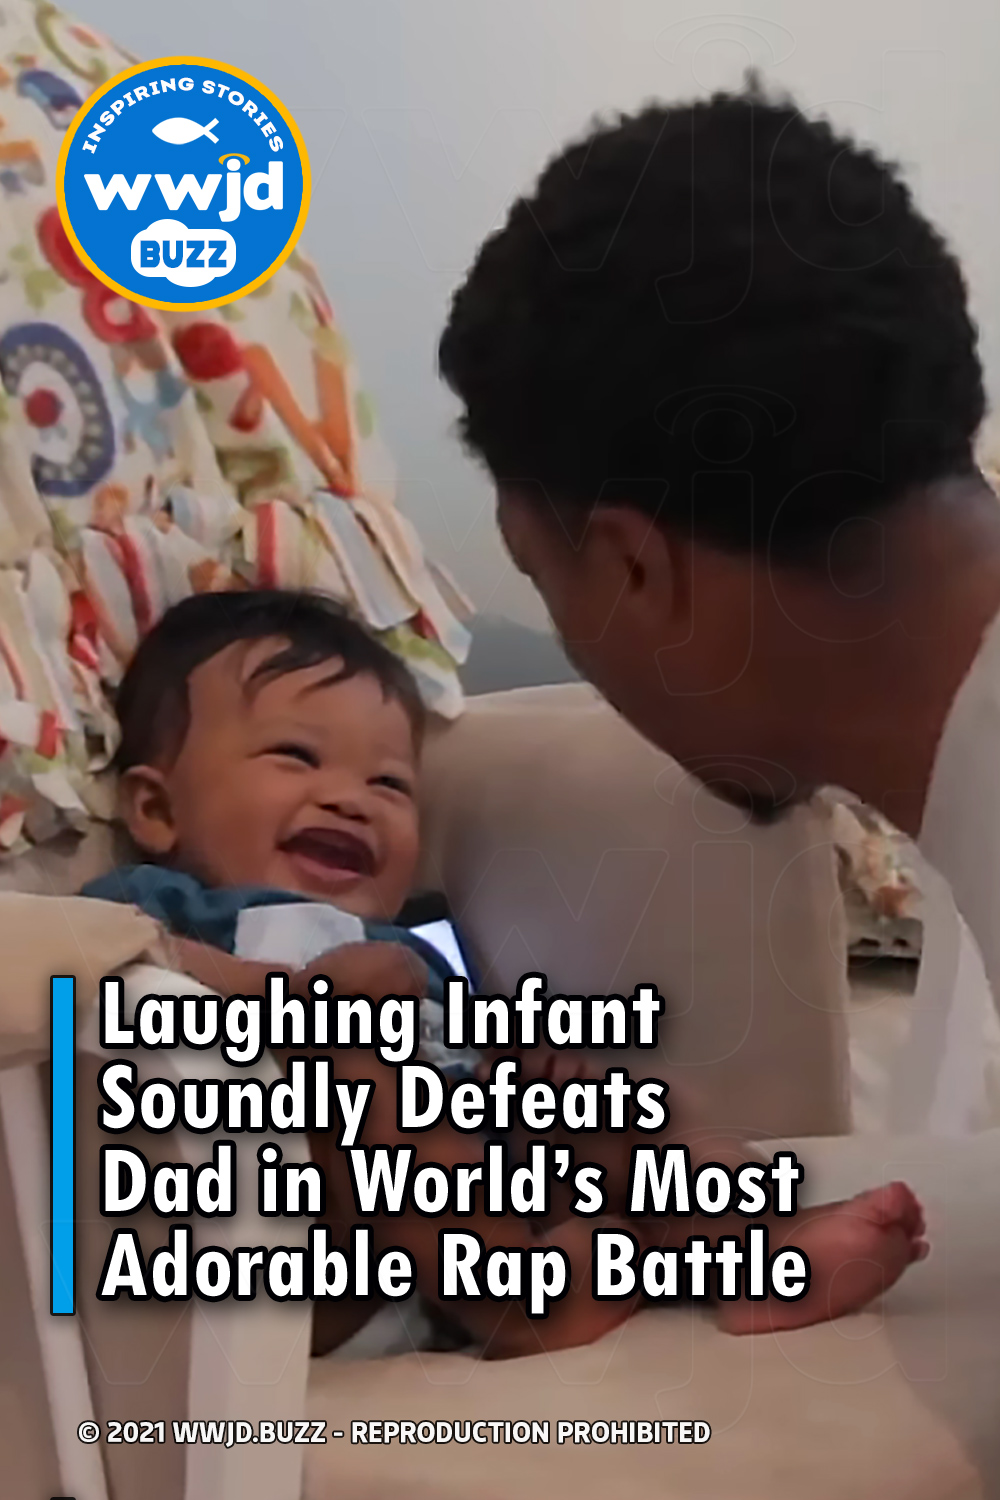 Laughing Infant Soundly Defeats Dad in World’s Most Adorable Rap Battle